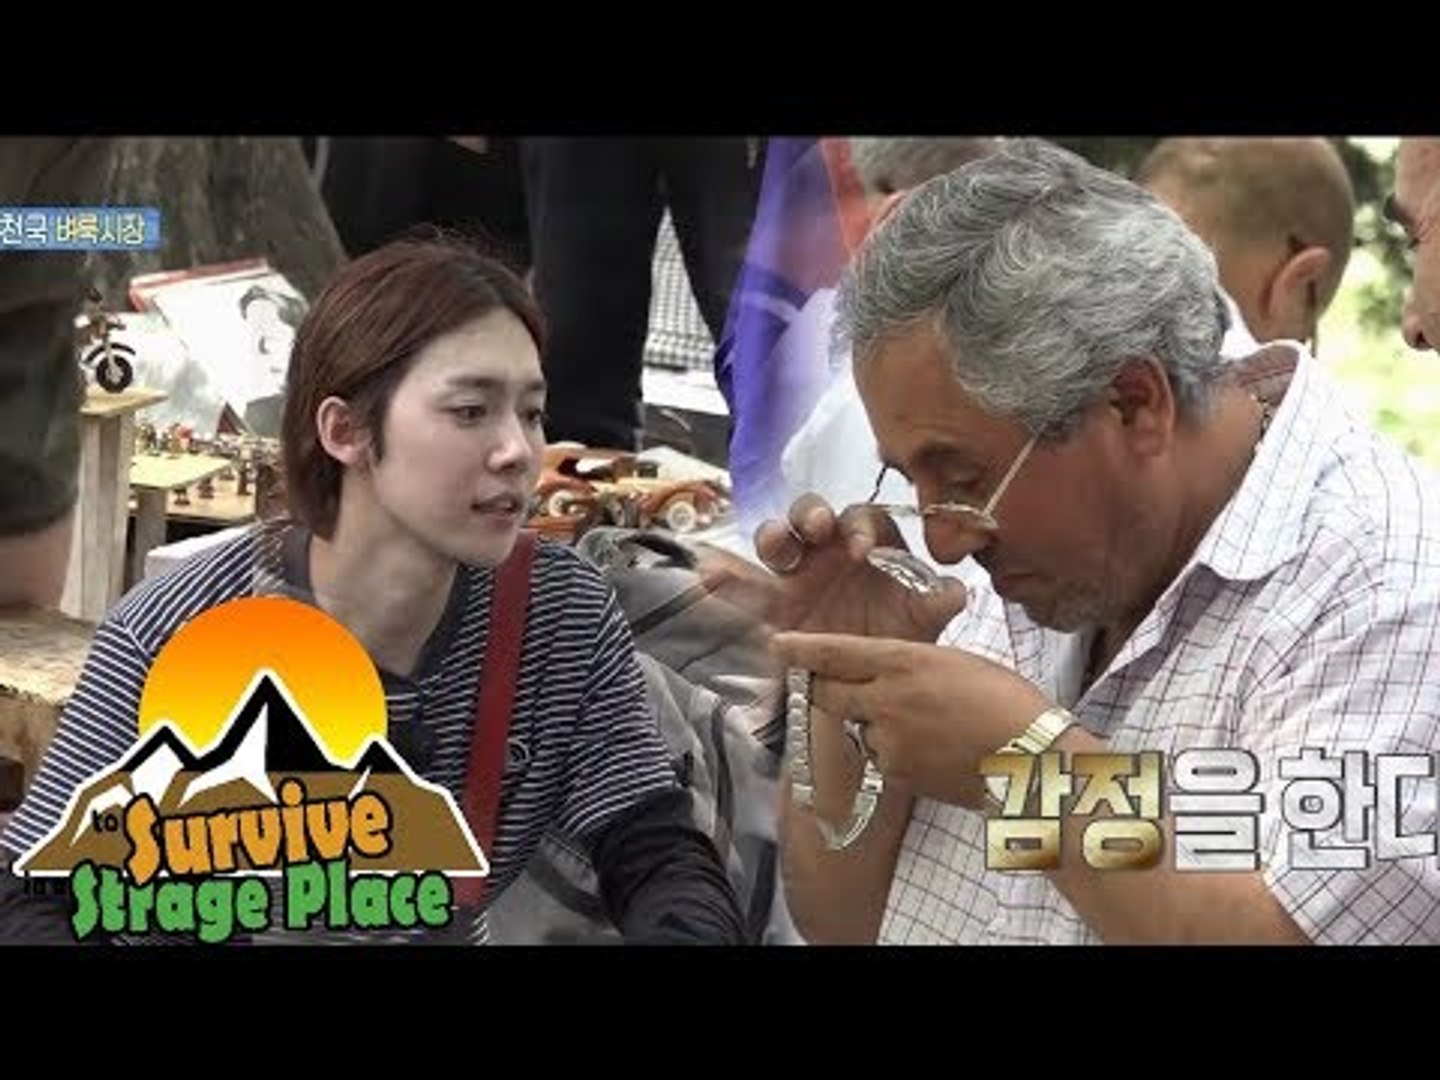 ⁣['JINWOO' To Survive In Georgia] They Try To Sell A Watch At Flea Market 20170827